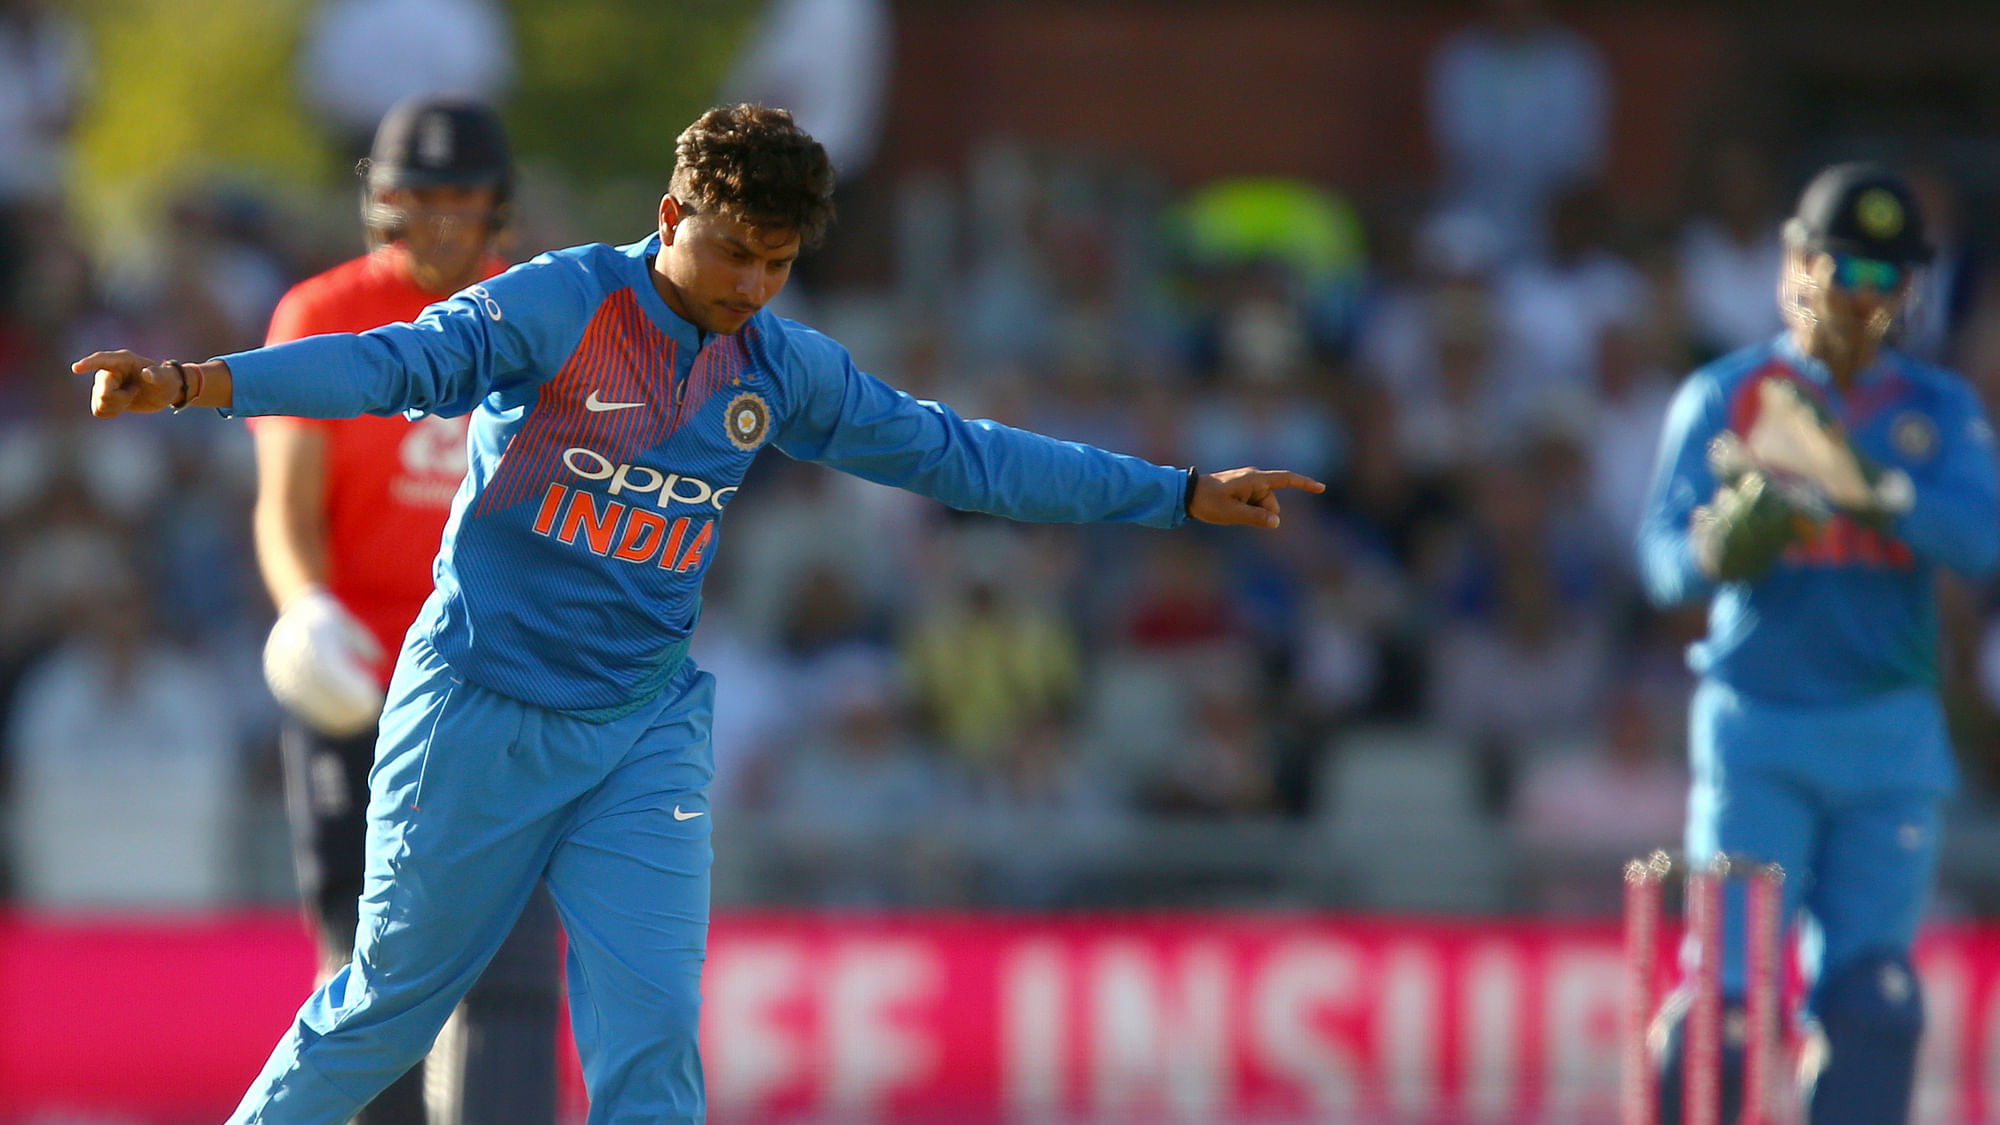 Kuldeep Yadav celebrates taking a fifer against England in the first T20 at Old Trafford.